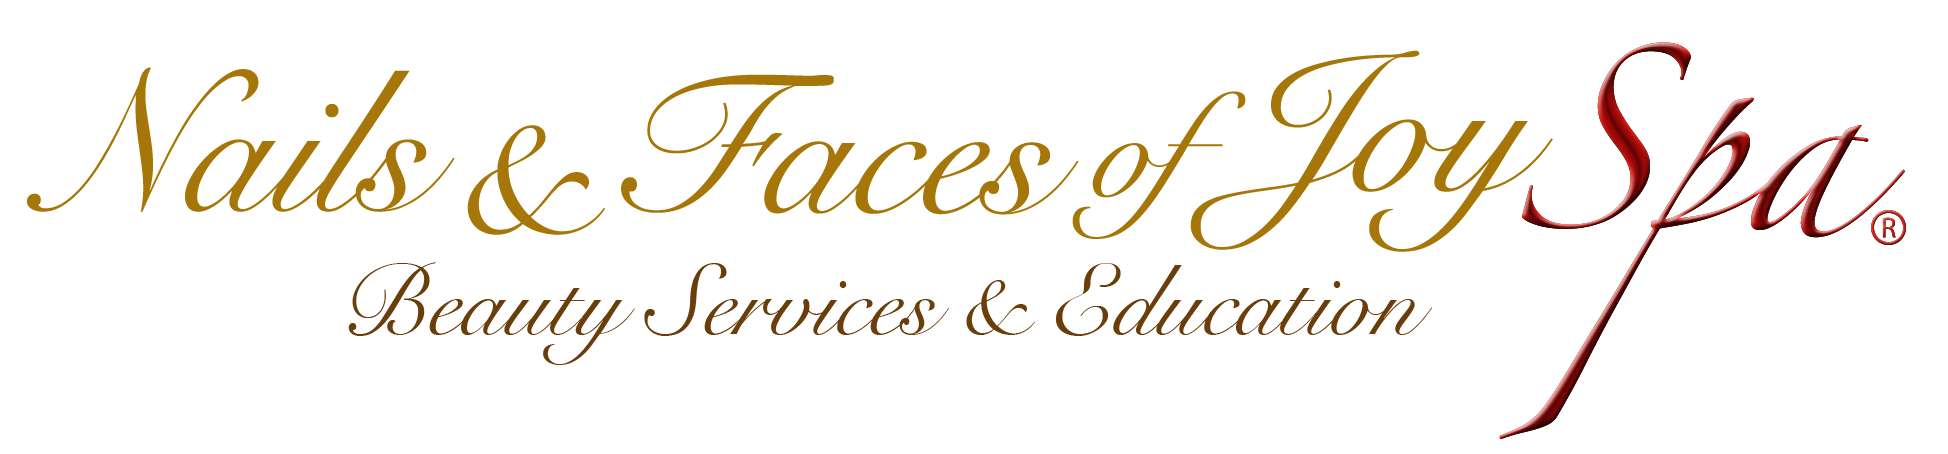 Nails &amp; Faces of Joy Spa Exclusively Mobile 